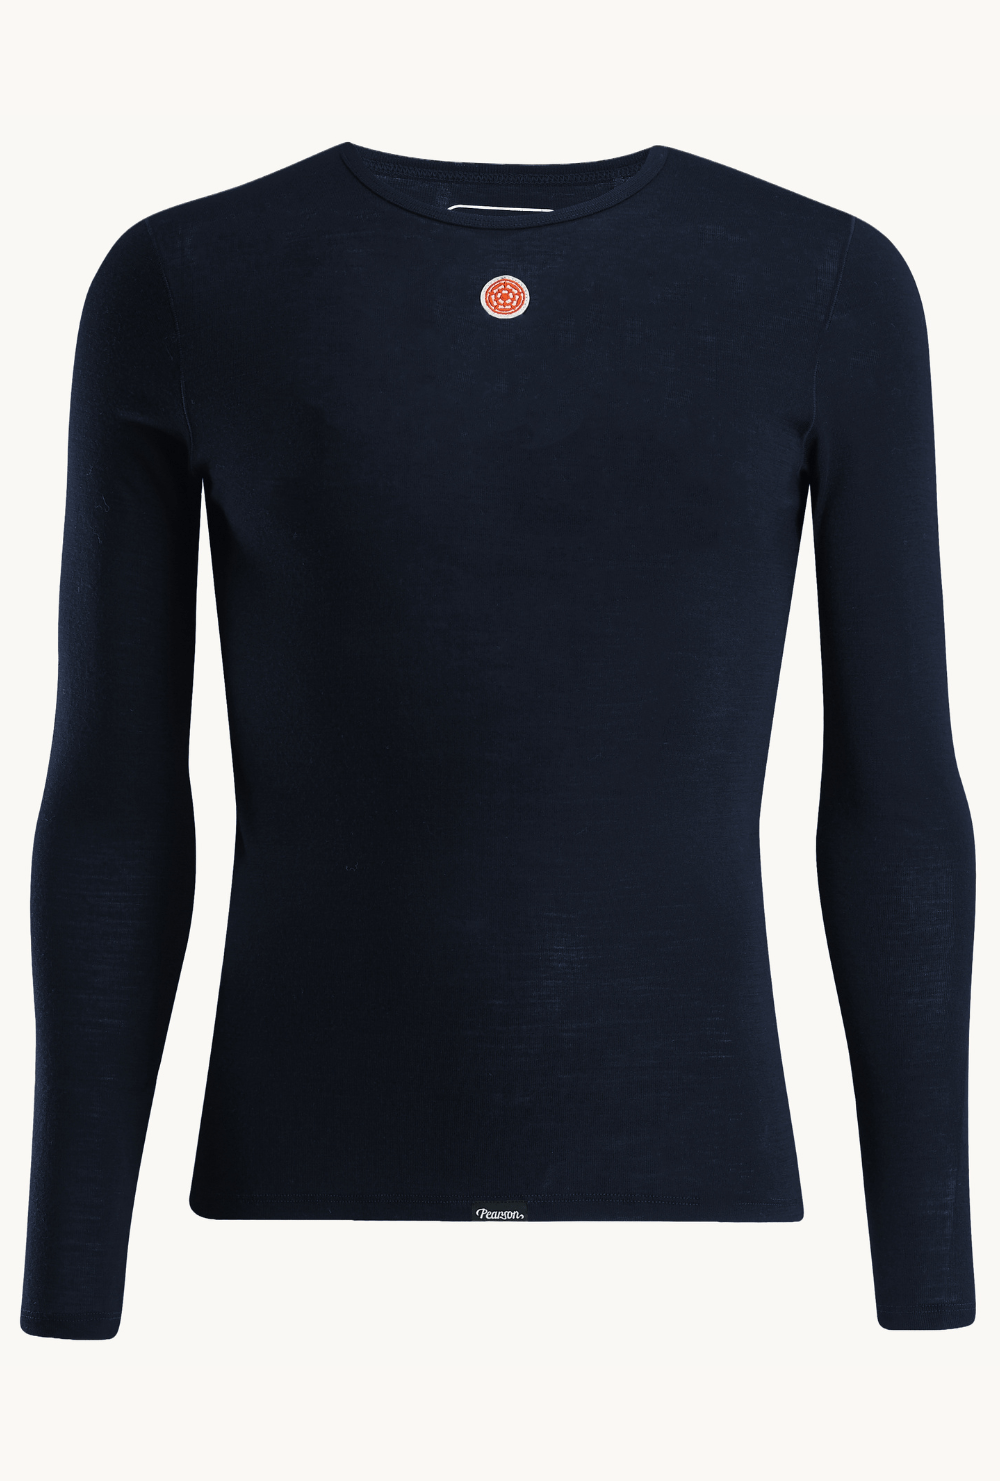 Pearson 1860  Skin In The Game - Long Sleeve Base Layer Navy Blue  Navy Blue / X-large